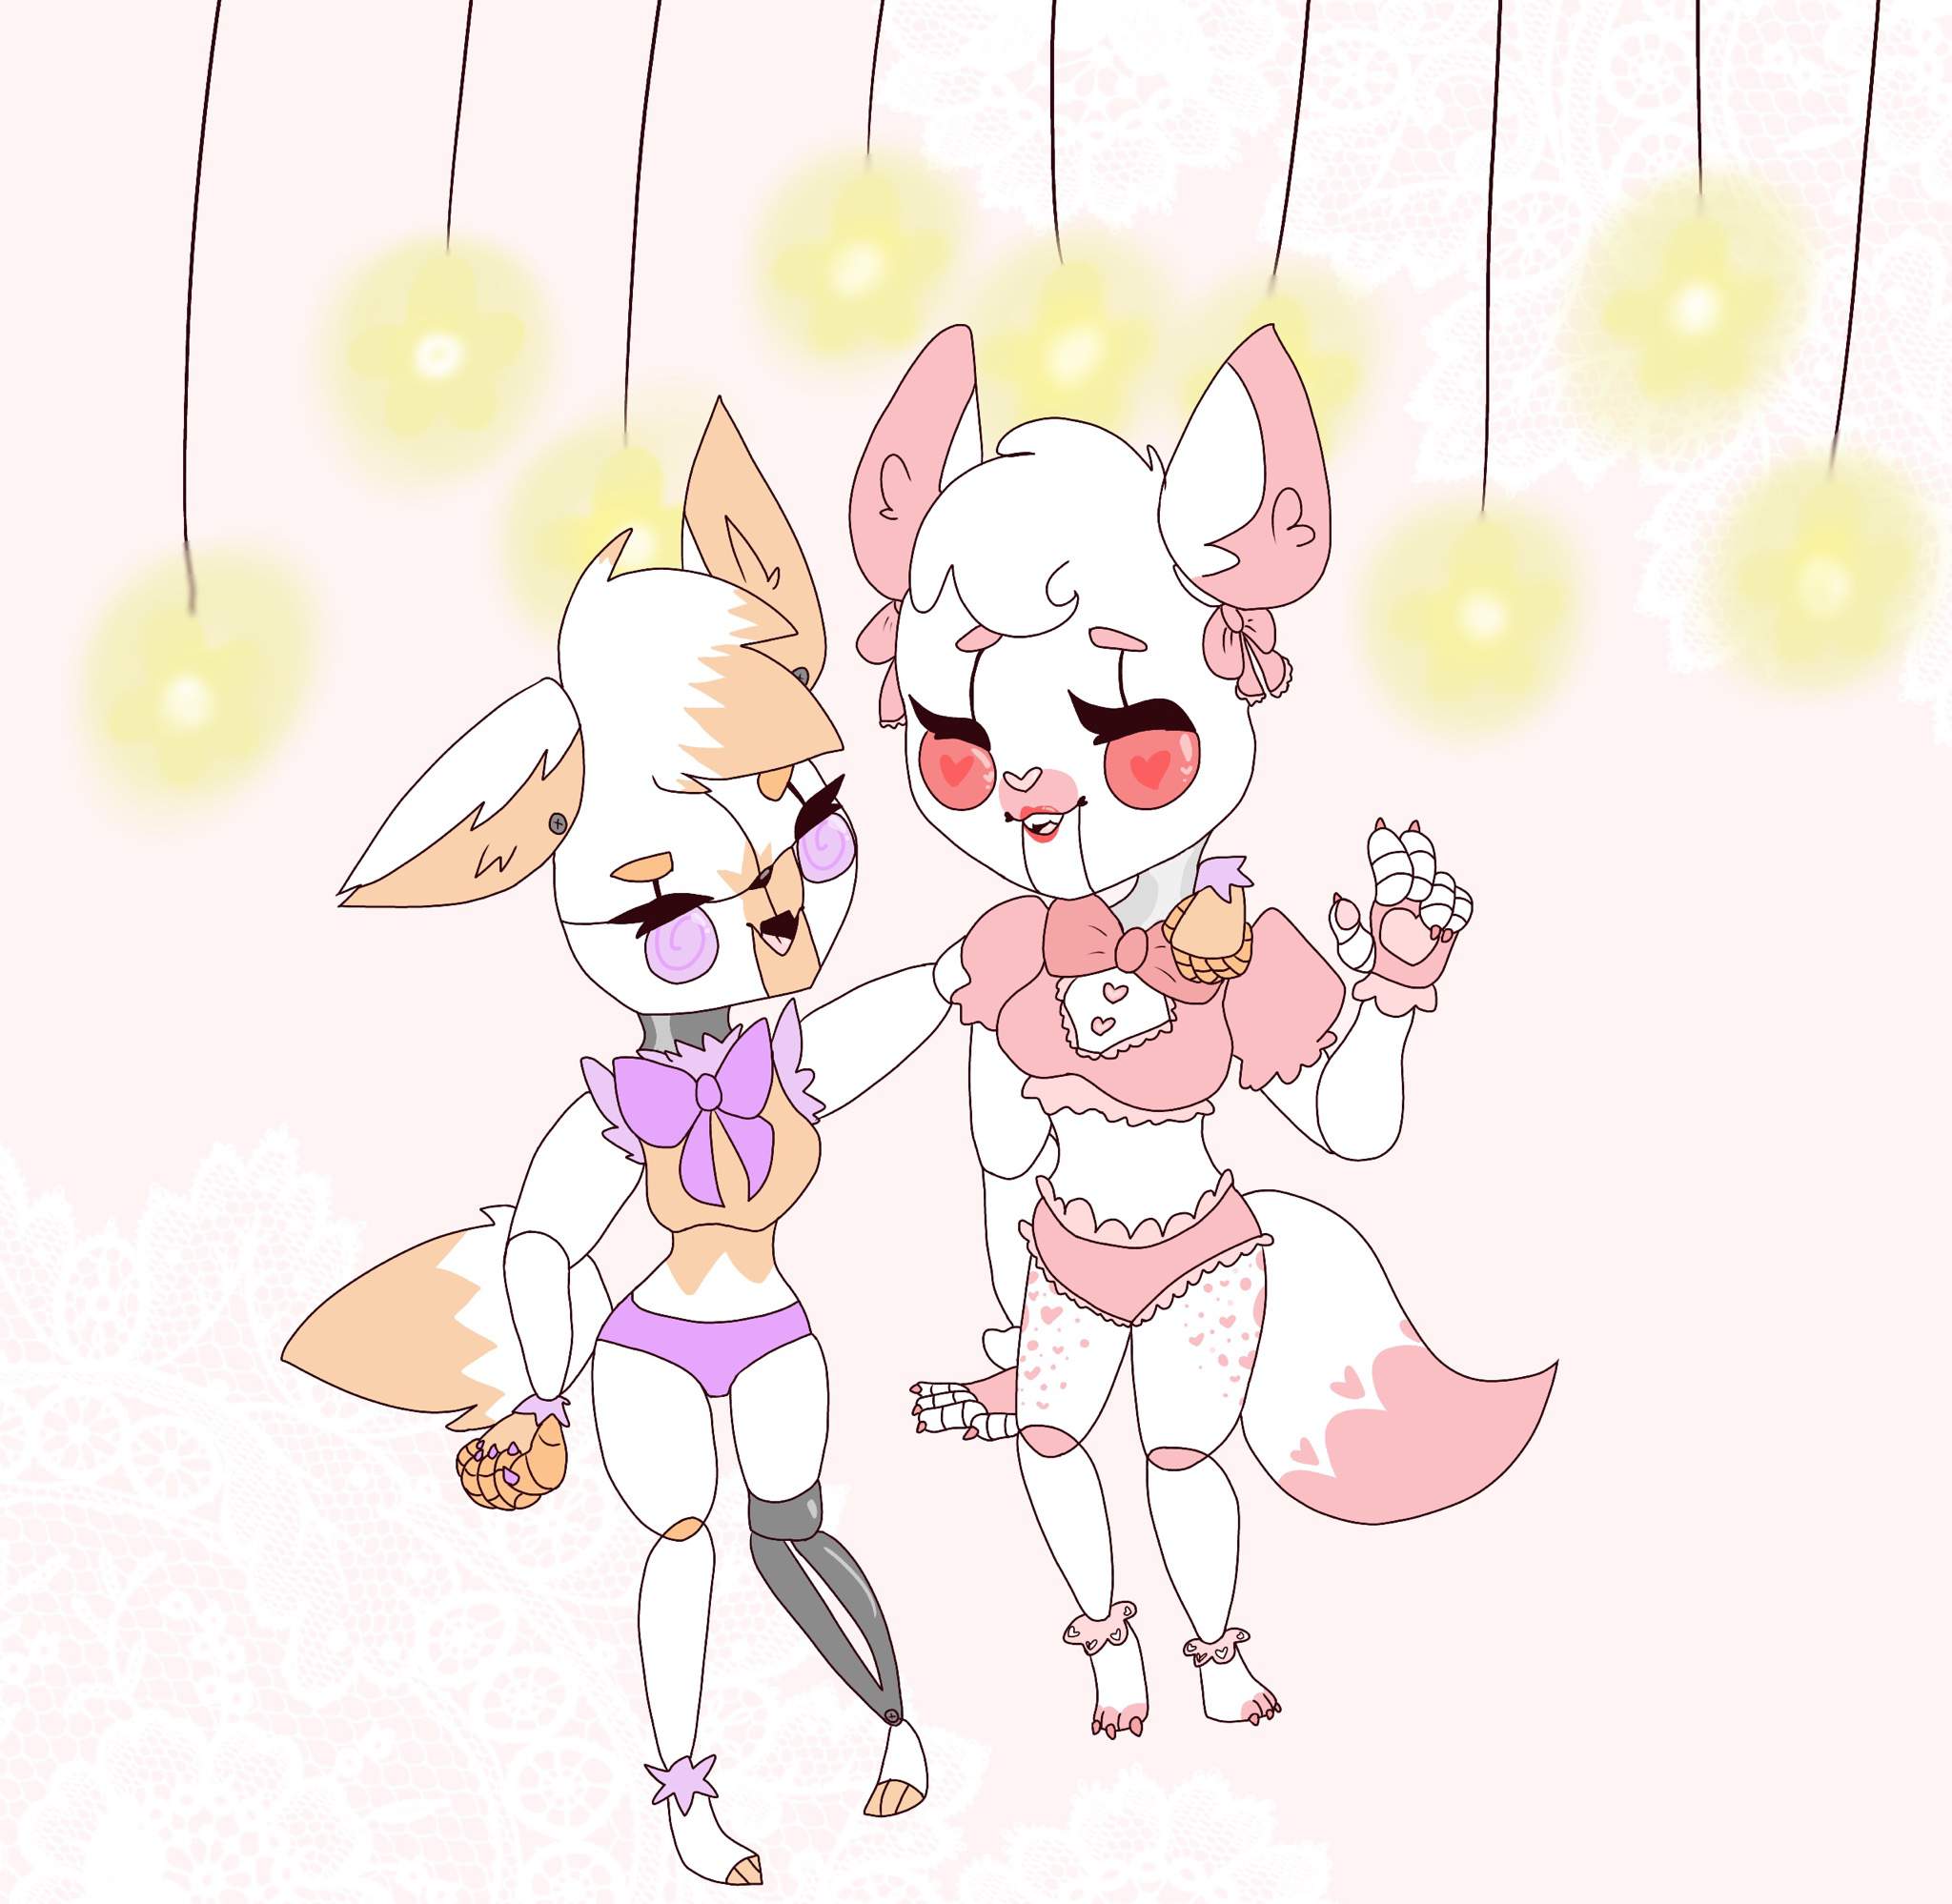 Here’s a collab I did with someone on Instagram uwu It’s Lolbit and mangle!...